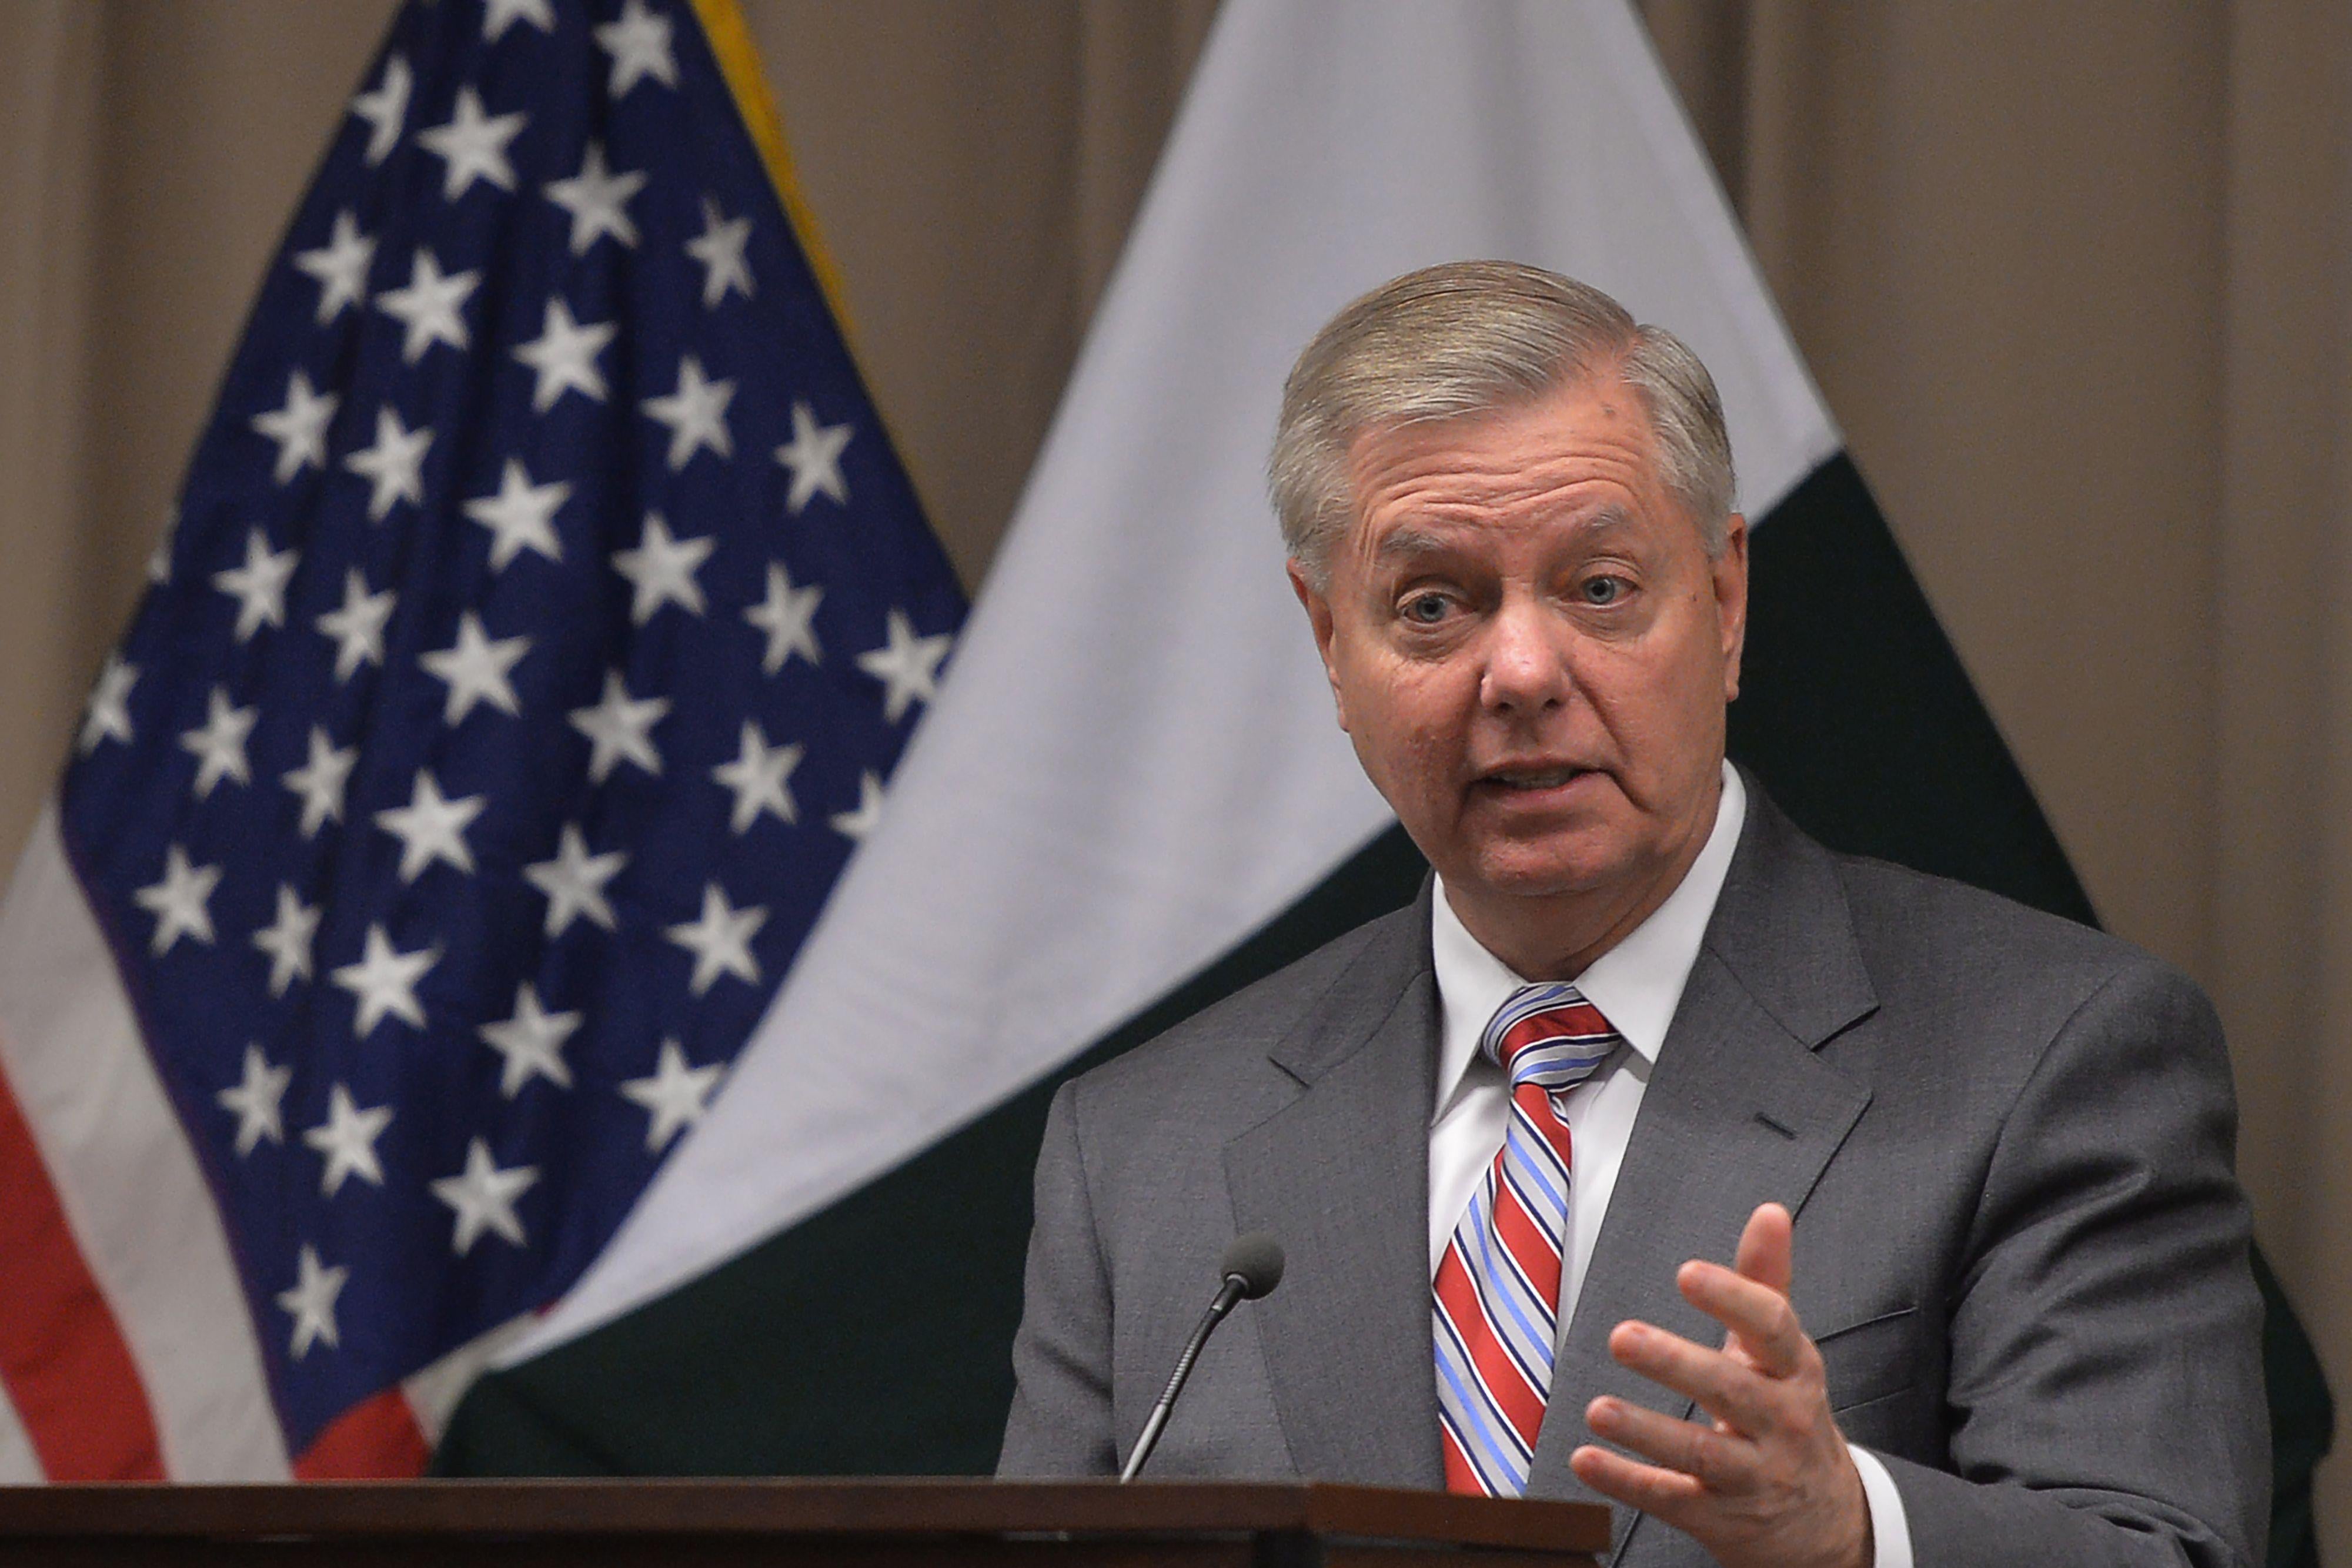 Senator Lindsey Graham holds a news conference at the U.S. embassy in Islamabad on January 20, 2019.